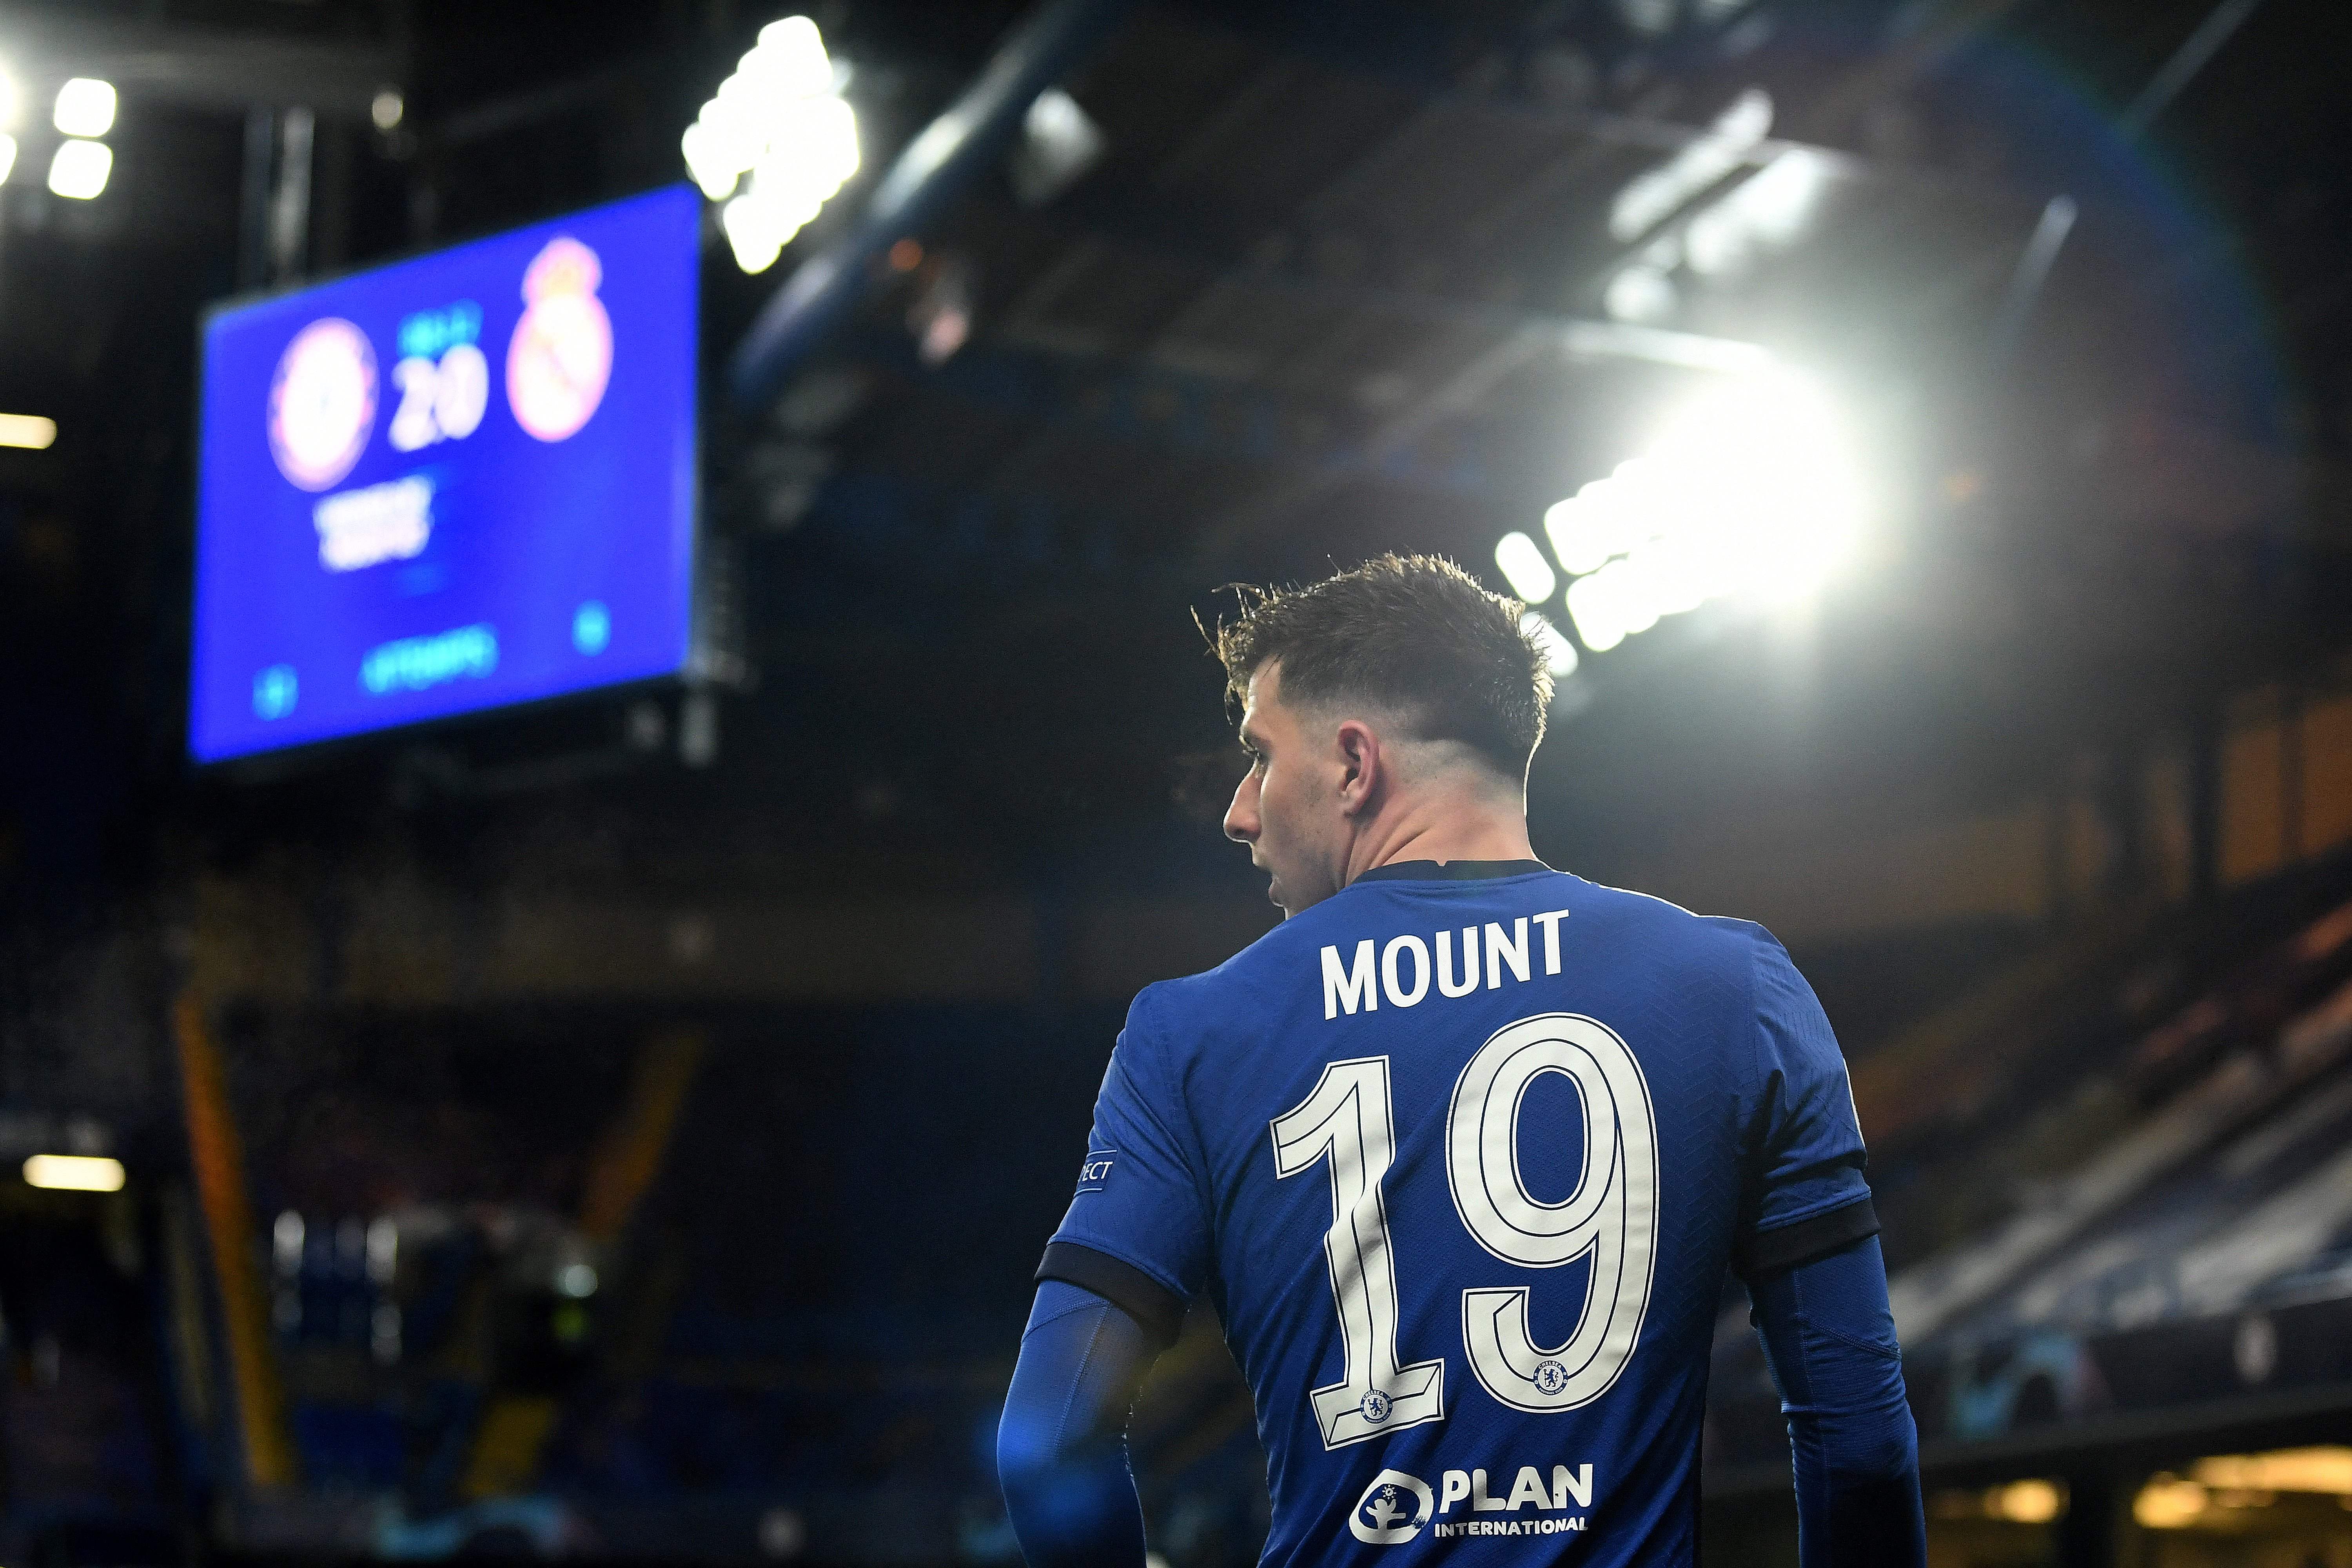 Mason Mount has played a key role in Chelsea’s run to the final